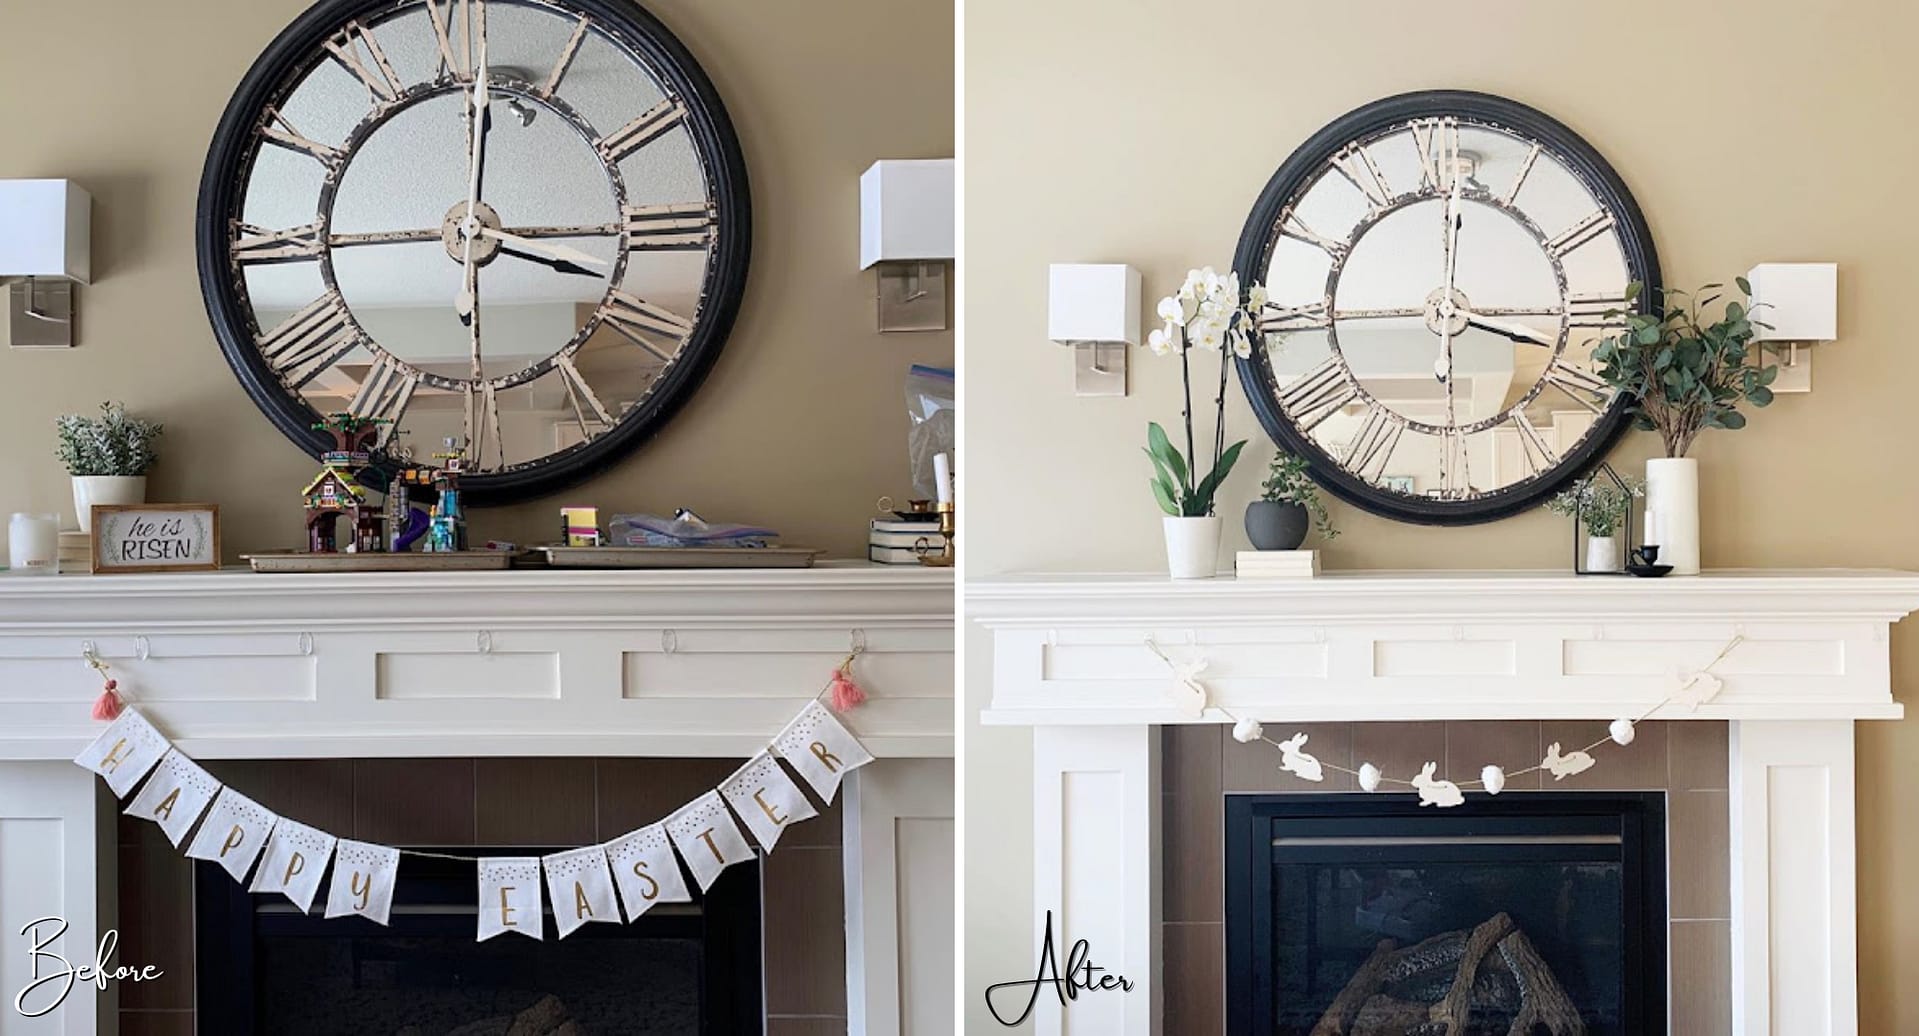 Before and after of a mantel with a large mirror/clock and a easter banner
